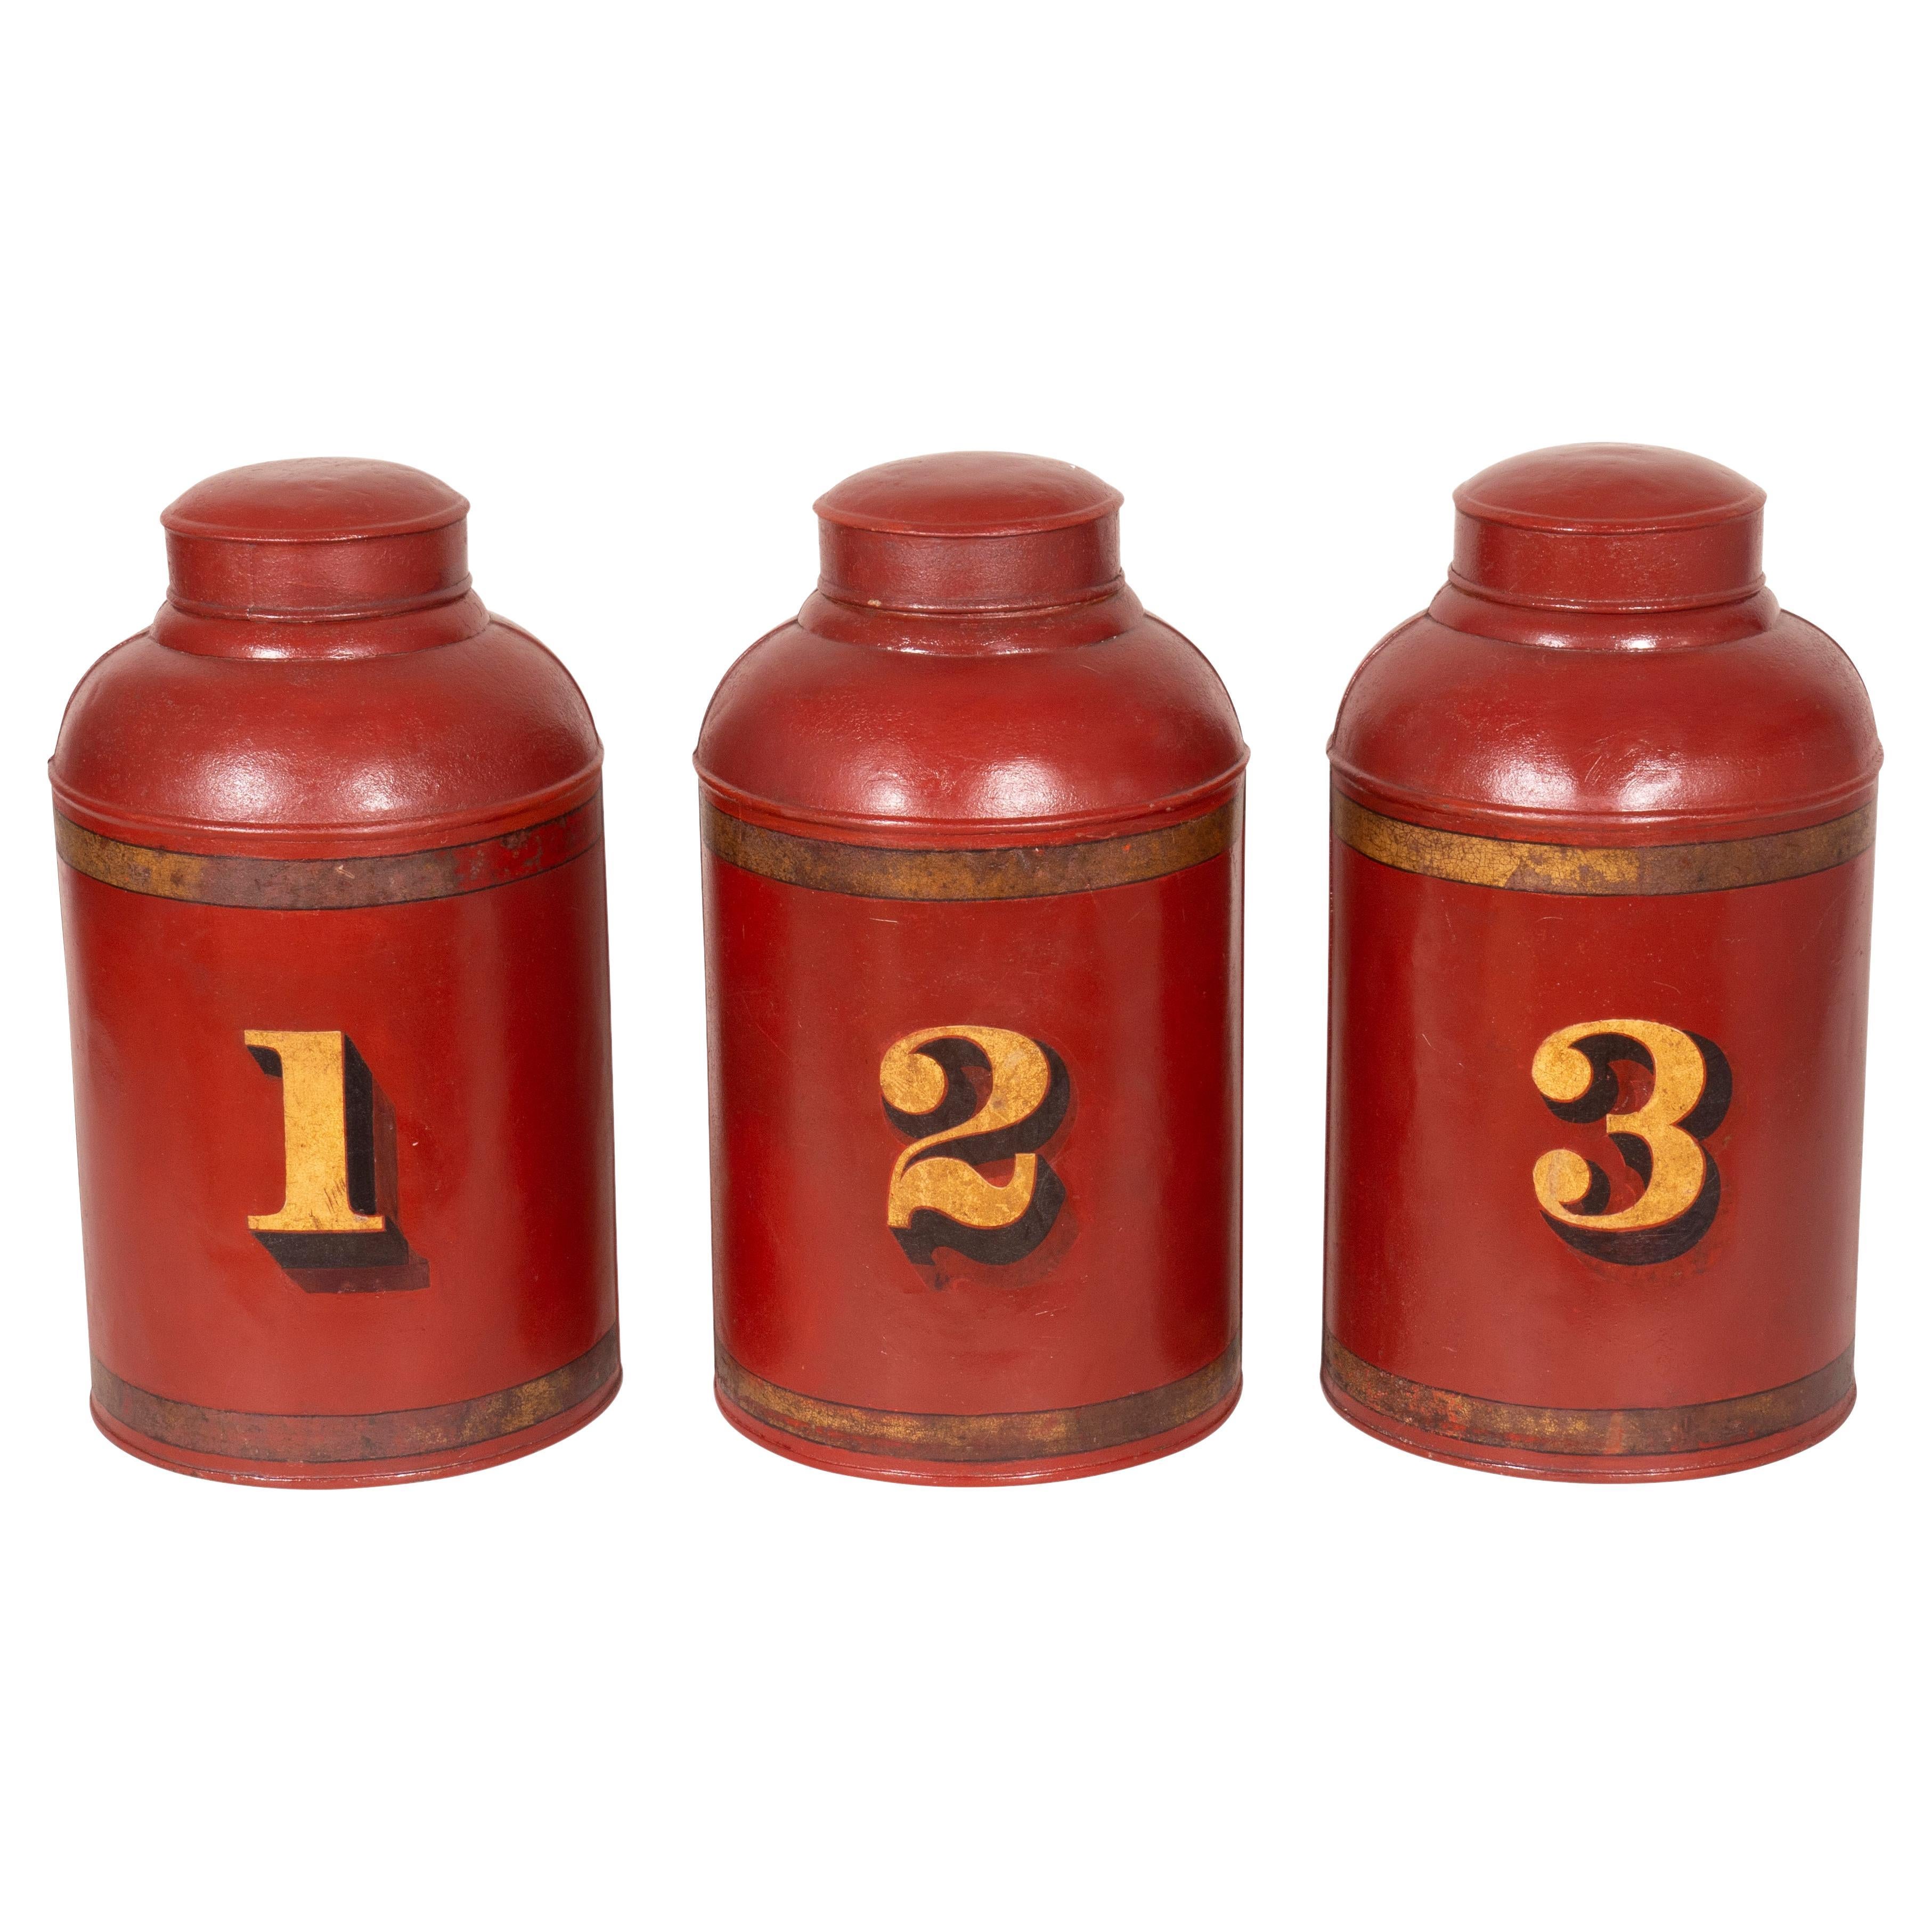 Victorian Red Tole Tea Cannisters by Parnall & Sons